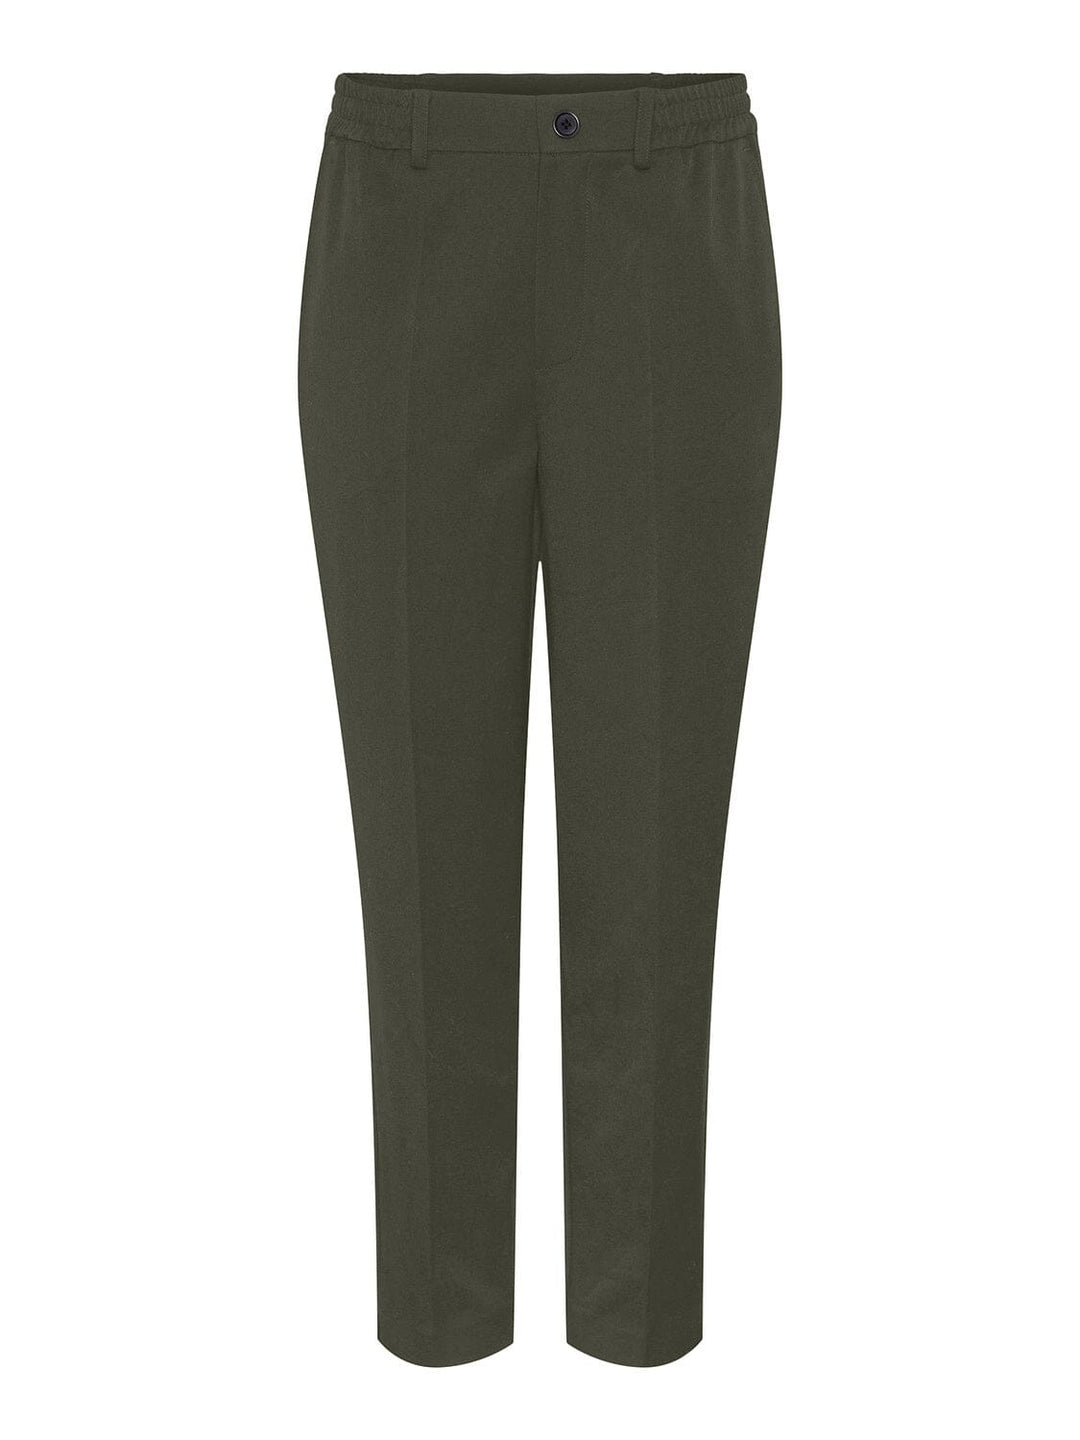 Pieces, Pccamil Hw Ankle Pant, Deep Lichen Green